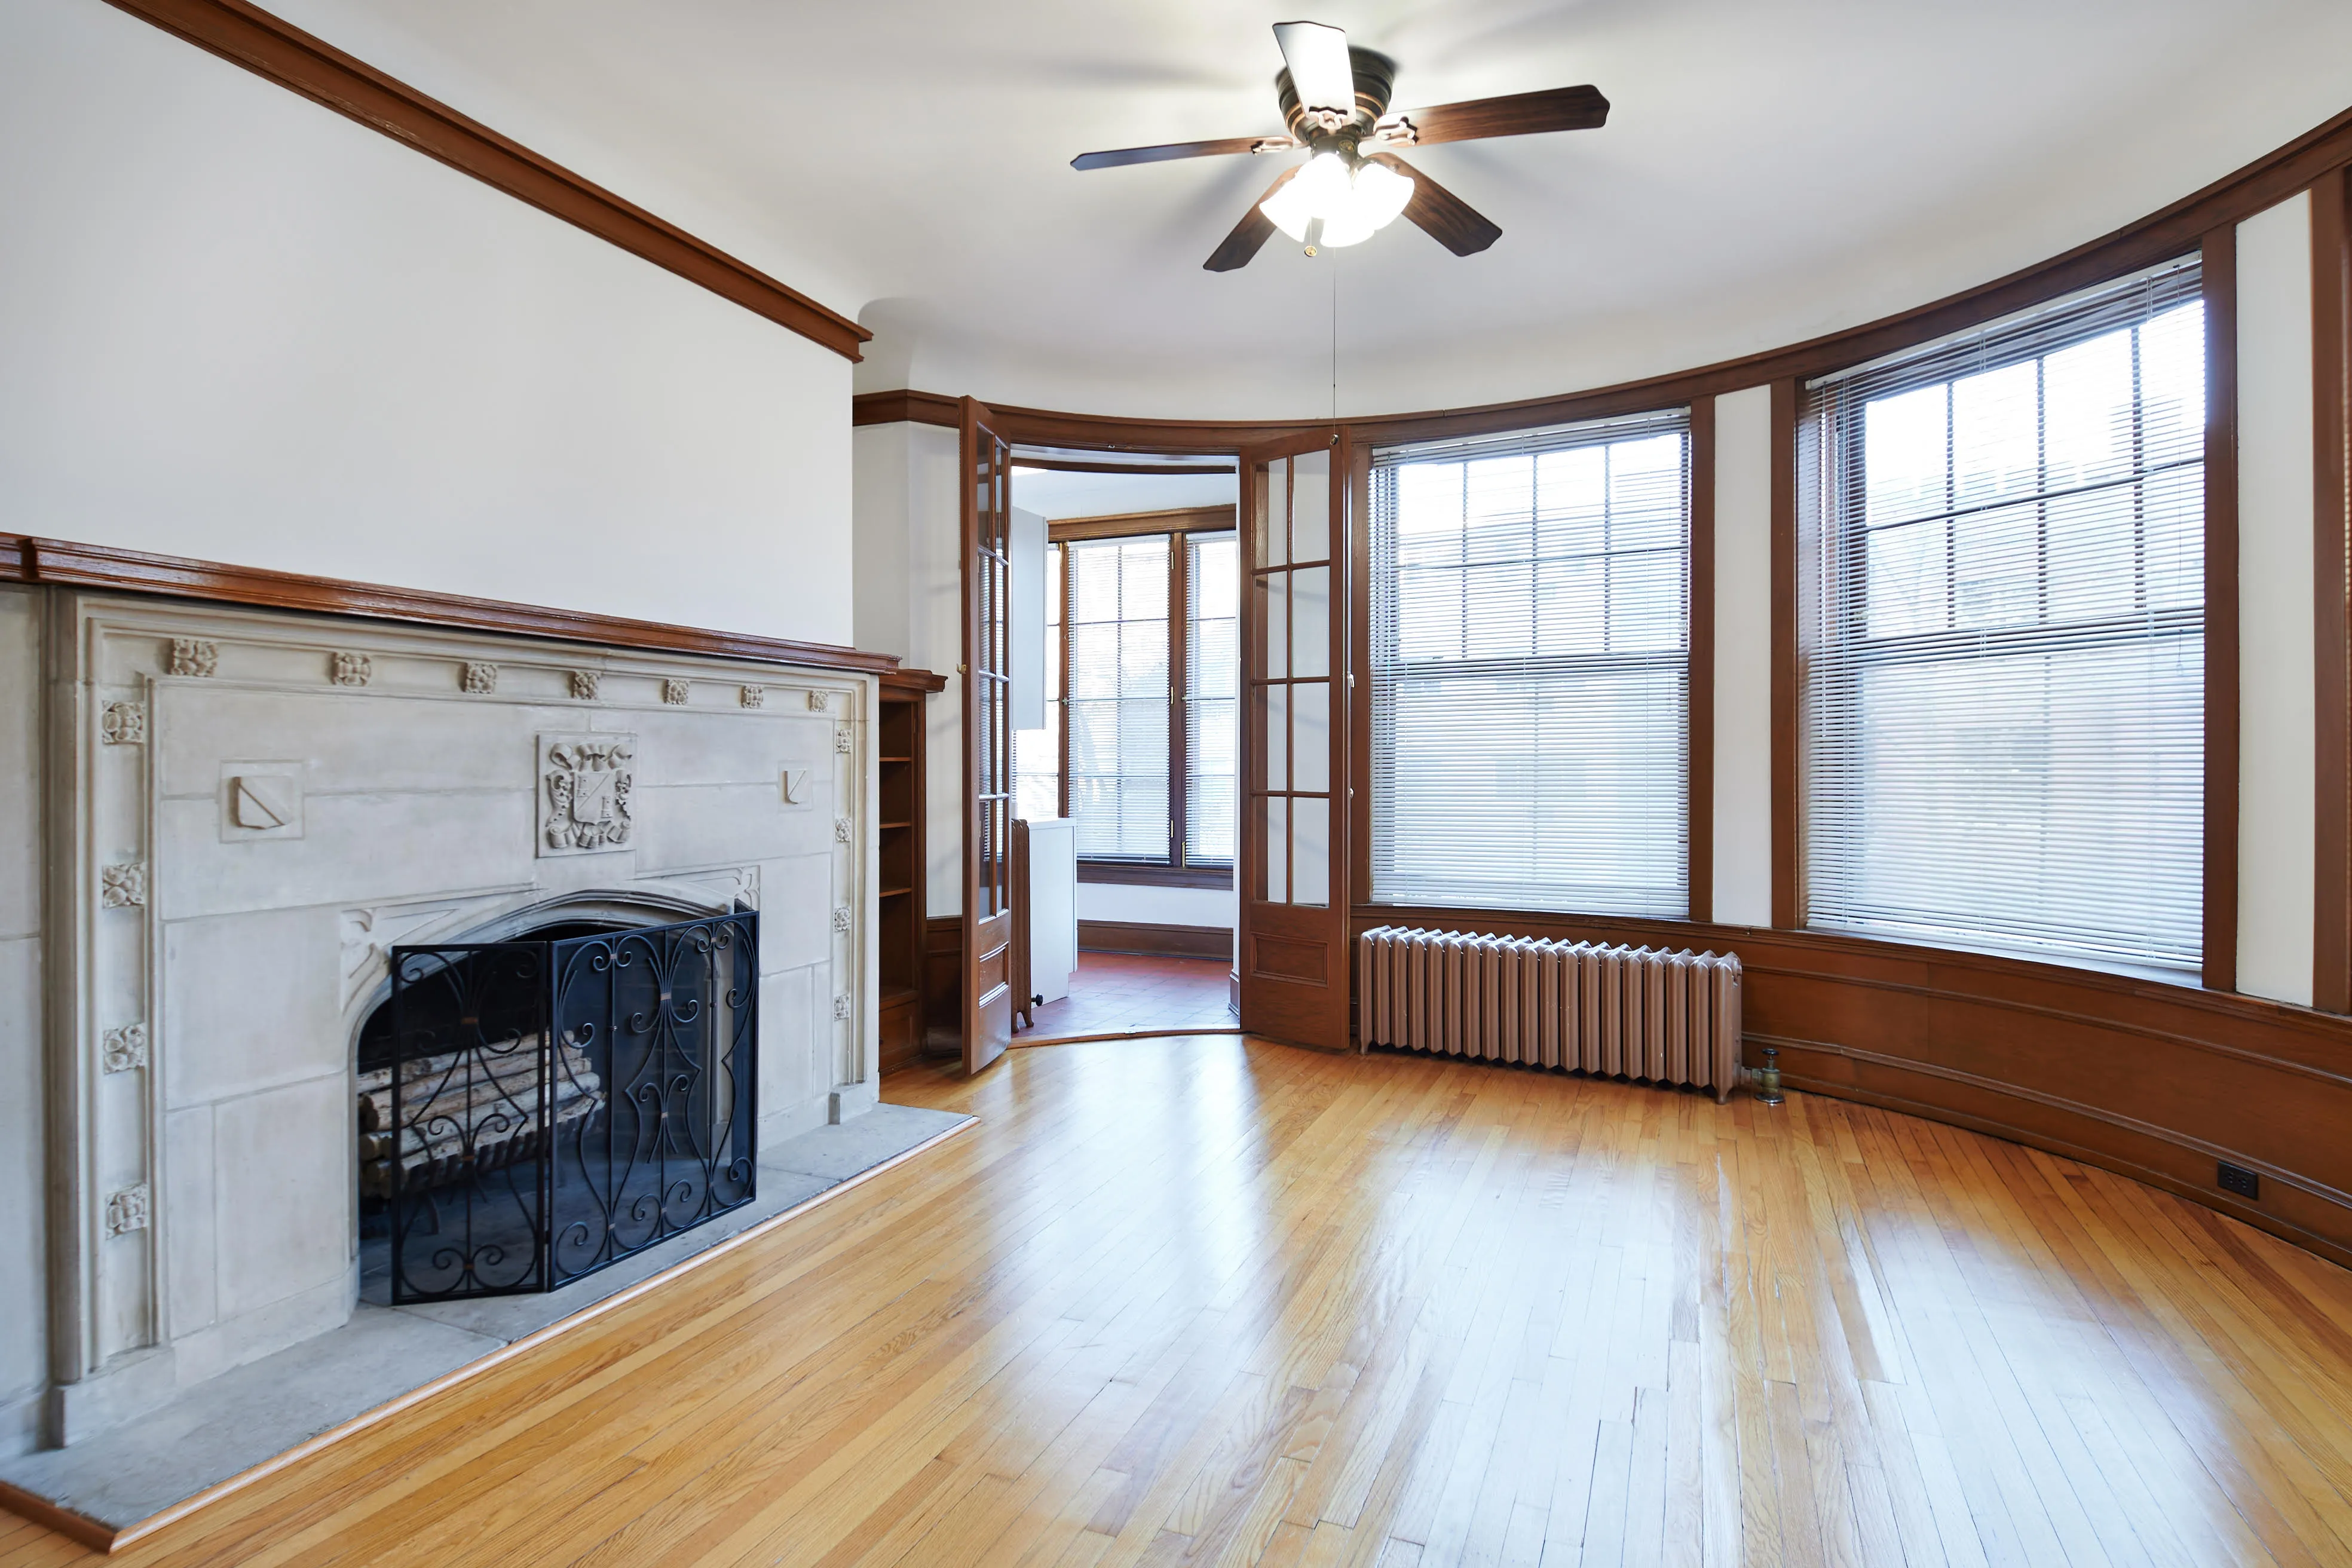 1012 W HOLLYWOOD AVE 60640-Beaconsfield Apartments-unit#A-Chicago-IL